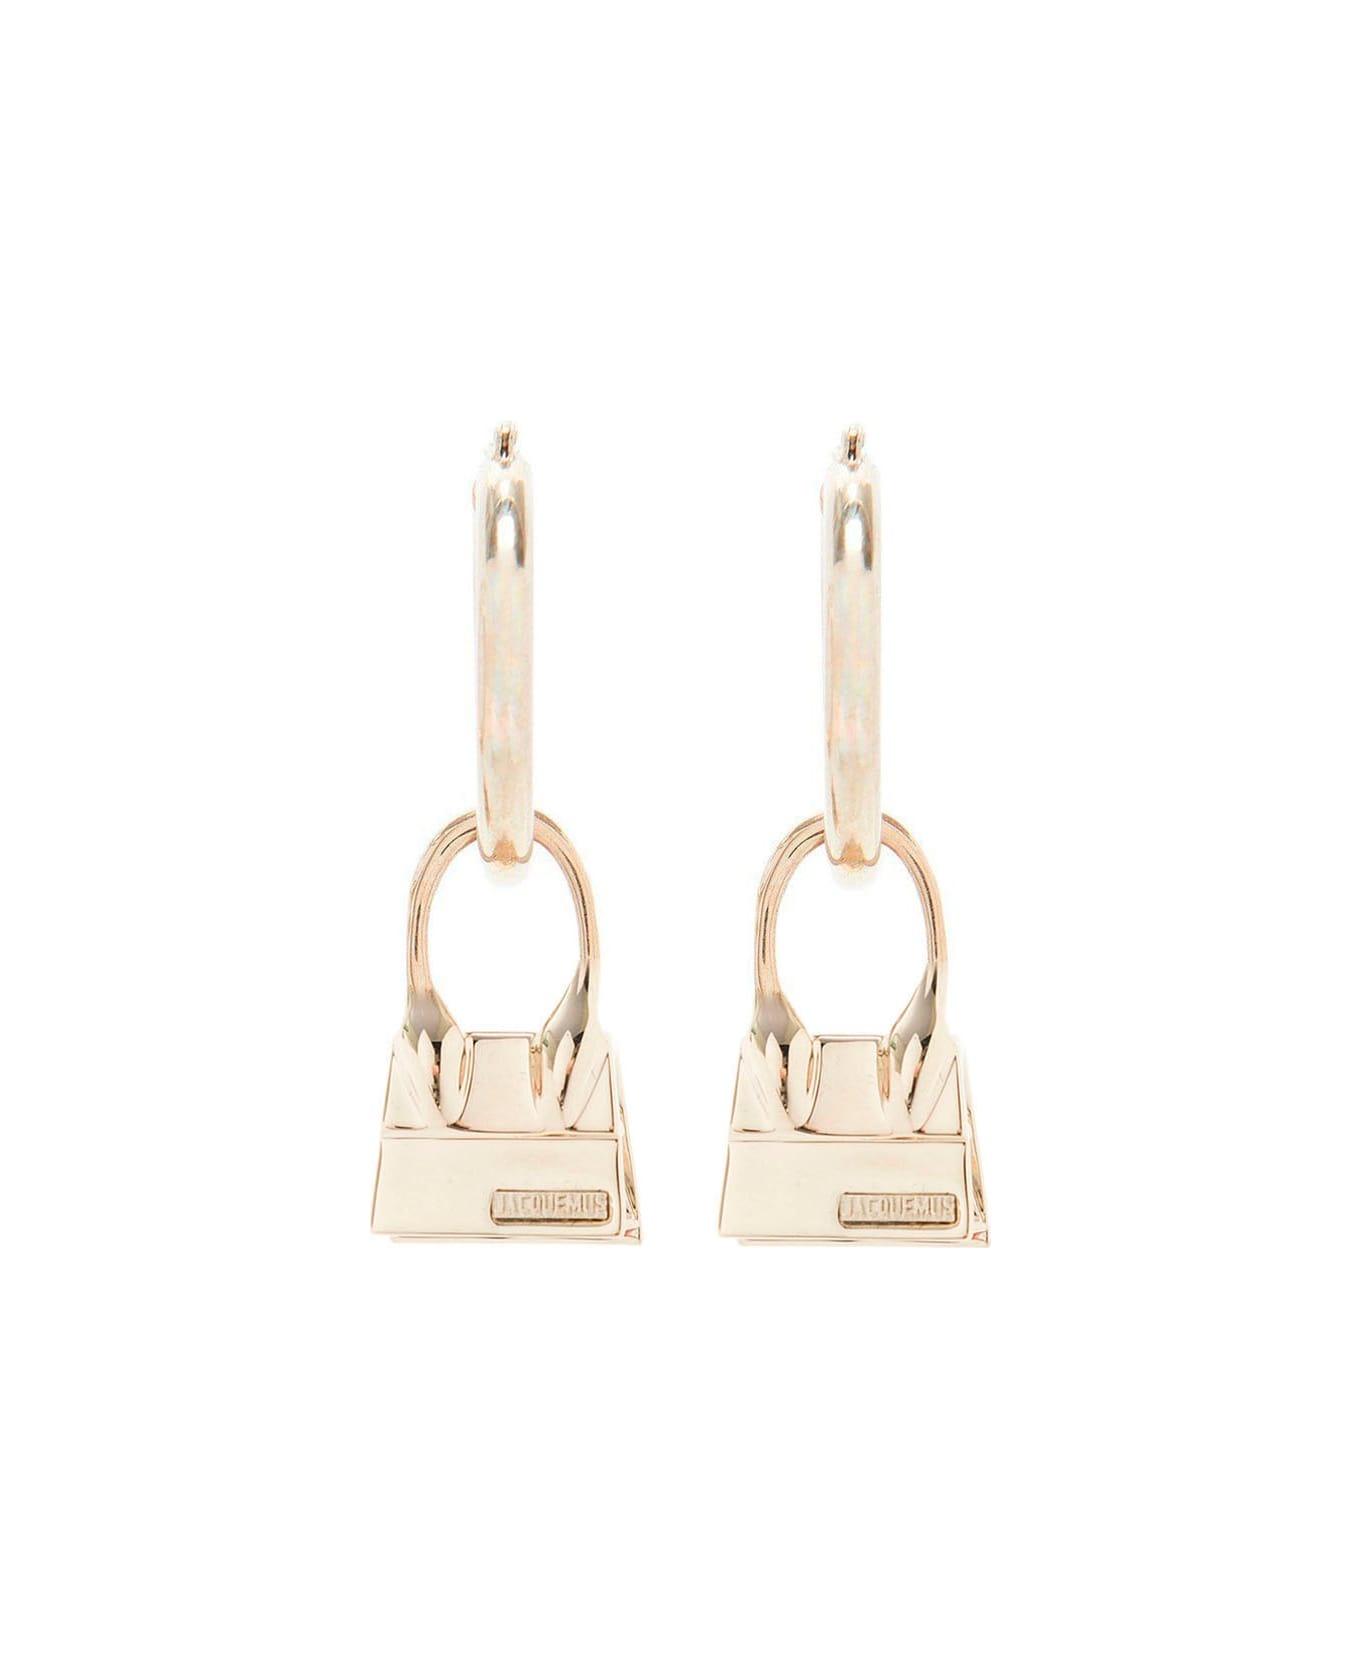 Les Creoles Chiquito Earrings - 1